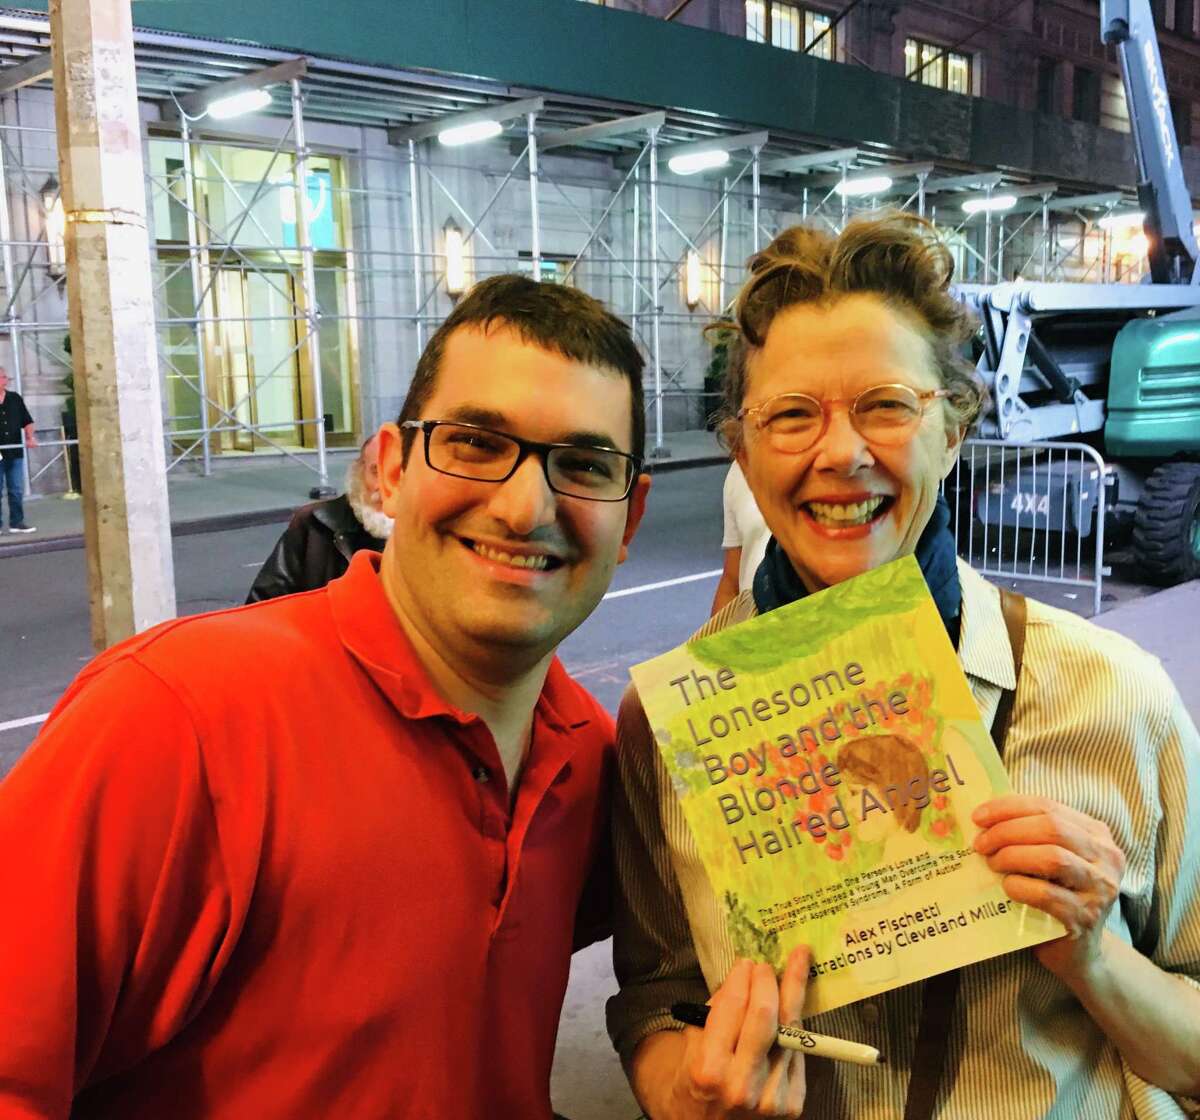 Ridgefield author Alex Fischetti gave a signed copy of his debut book, The Lonesome Boy and the Blonde Haired Angel, to actress Annette Bening after her Broadway performance of All My Sons on June 26.